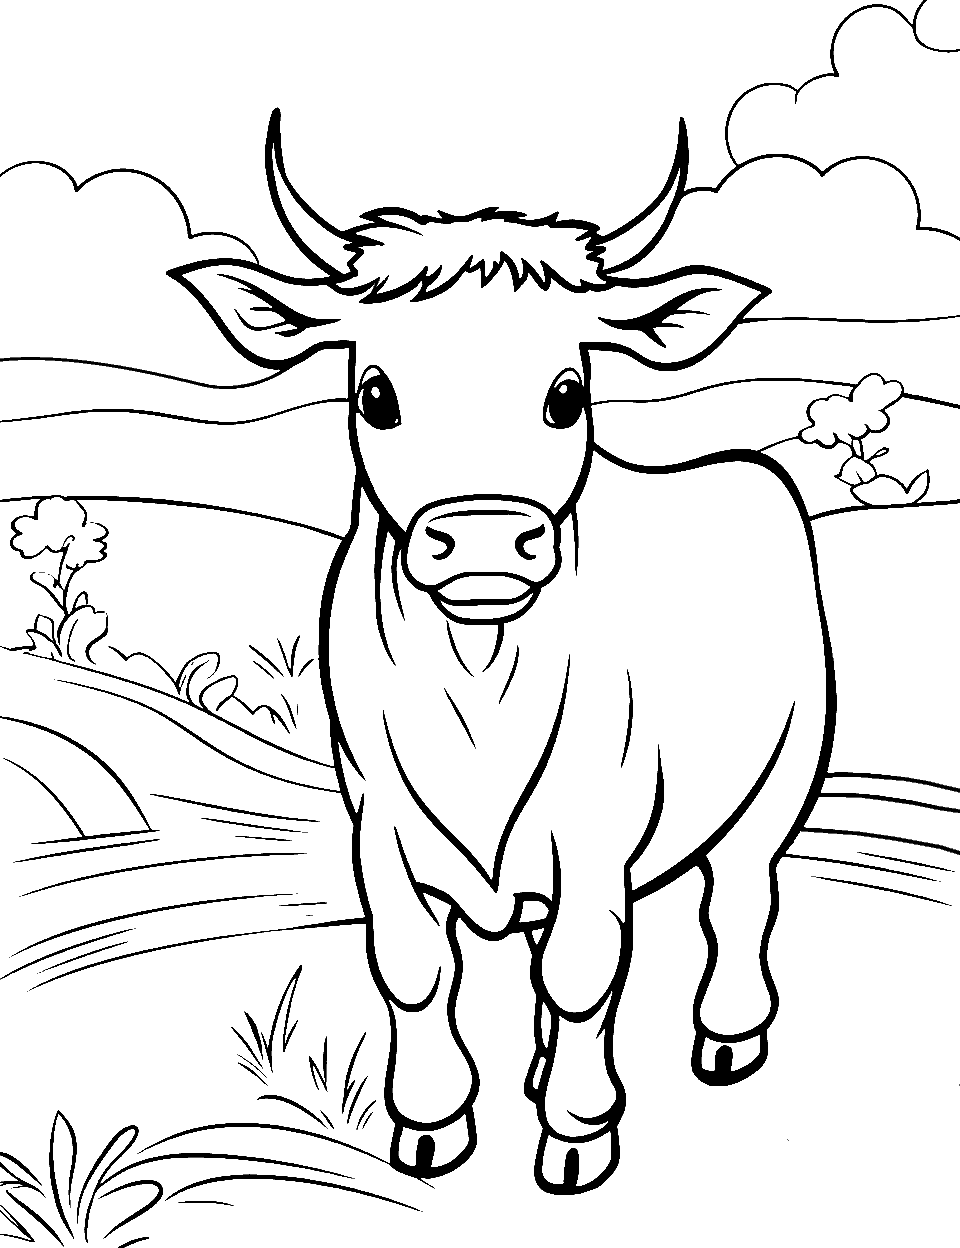 Fantasyland Cow Coloring Page - A cow in a serene fantasyland peacefully strolling around.